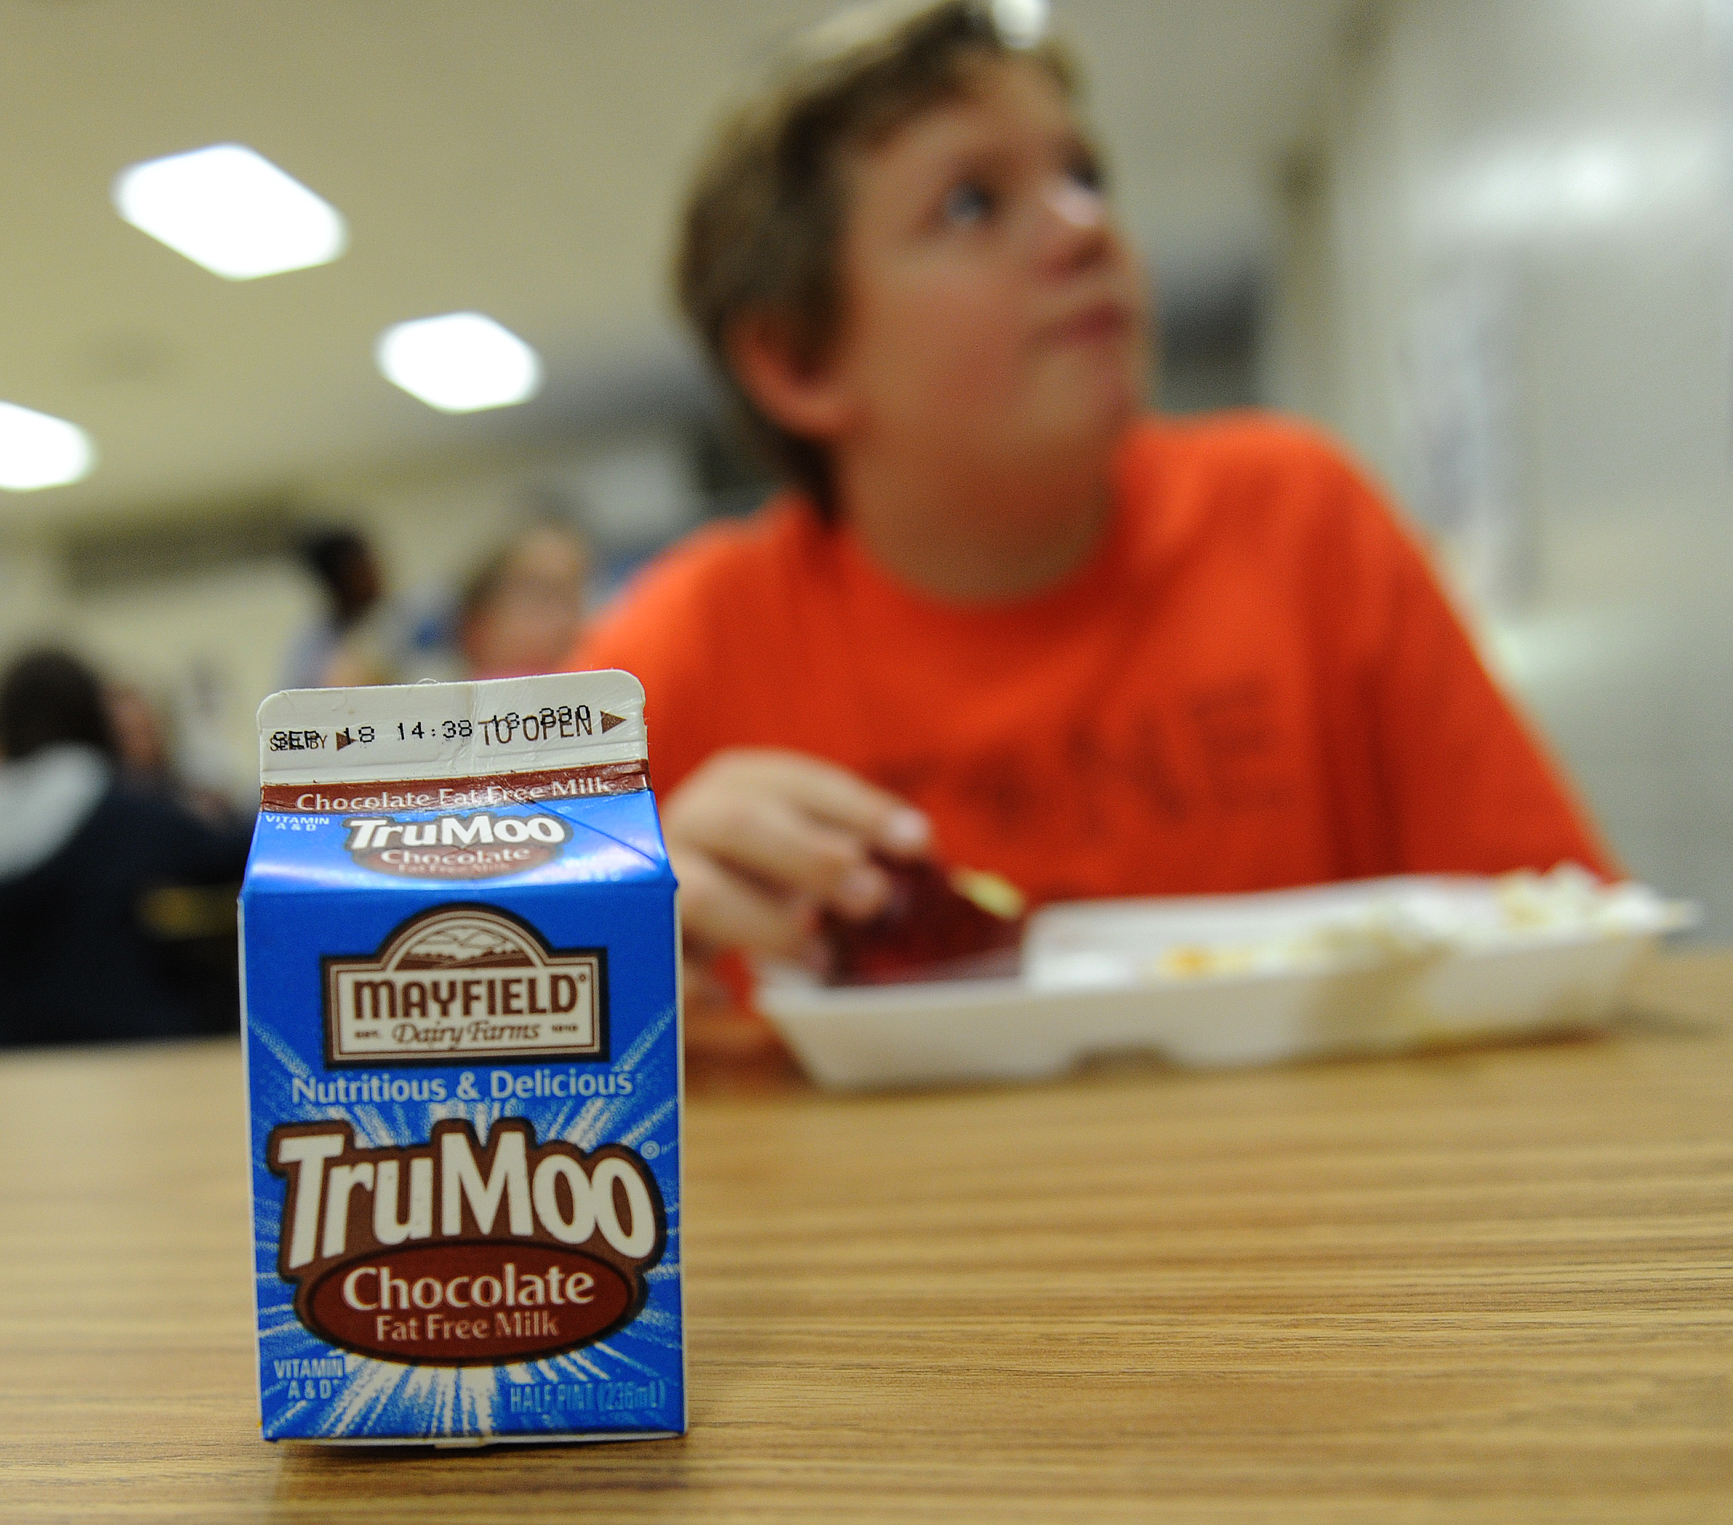 Milk intake dropped by 41% when chocolate milk removed from school